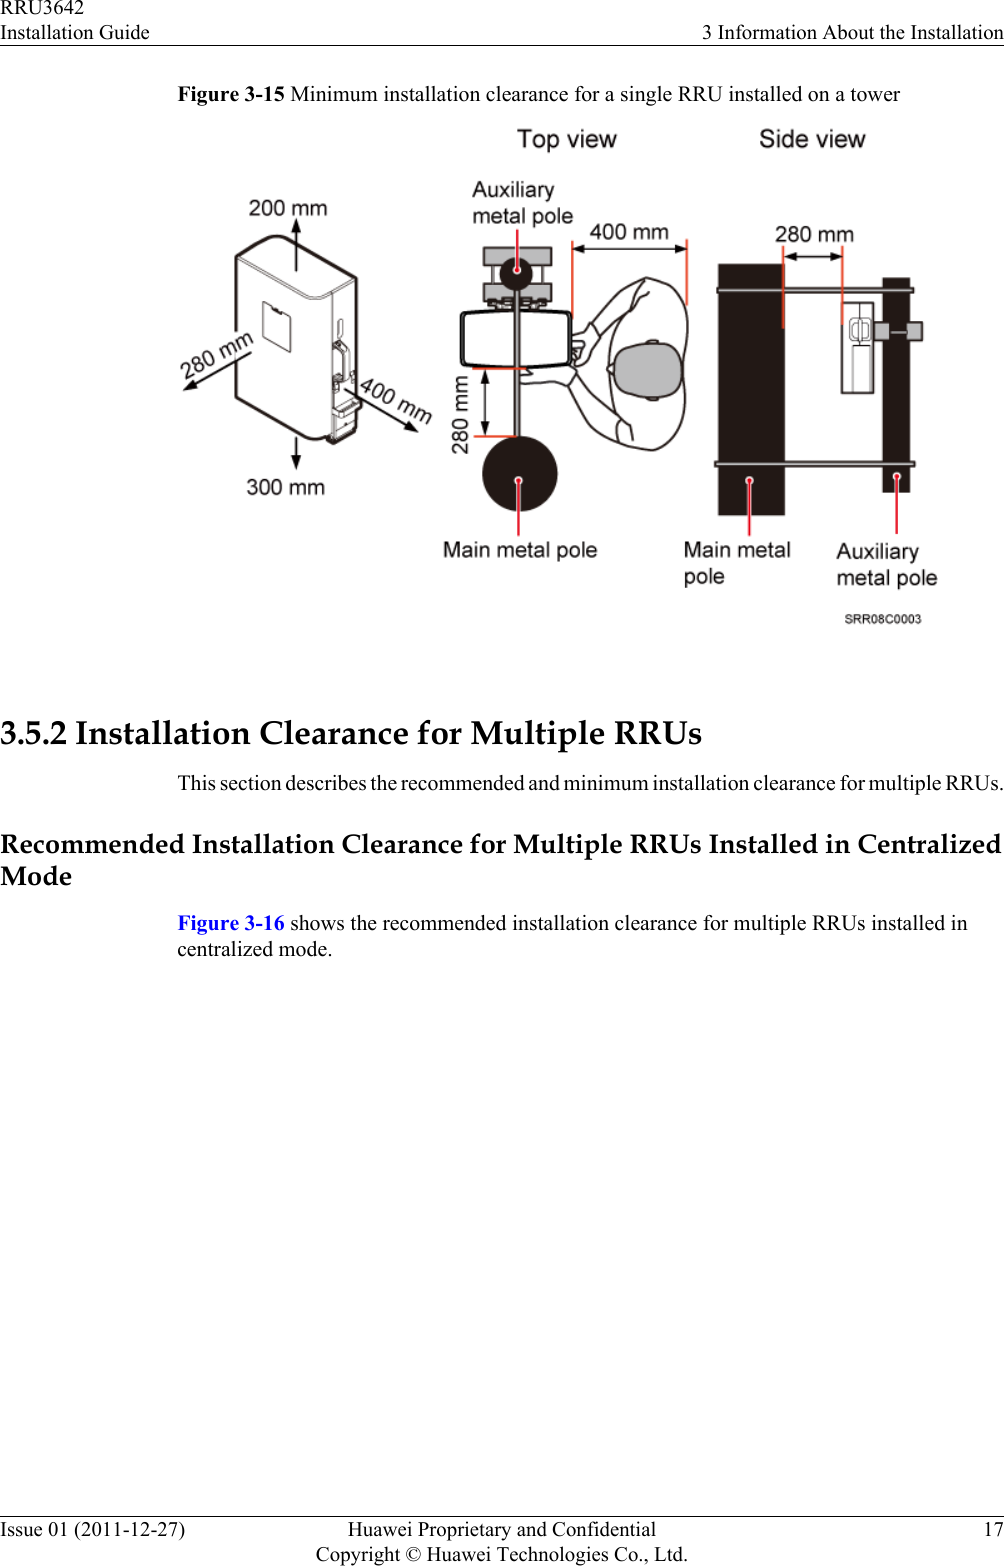 Figure 3-15 Minimum installation clearance for a single RRU installed on a tower 3.5.2 Installation Clearance for Multiple RRUsThis section describes the recommended and minimum installation clearance for multiple RRUs.Recommended Installation Clearance for Multiple RRUs Installed in CentralizedModeFigure 3-16 shows the recommended installation clearance for multiple RRUs installed incentralized mode.RRU3642Installation Guide 3 Information About the InstallationIssue 01 (2011-12-27) Huawei Proprietary and ConfidentialCopyright © Huawei Technologies Co., Ltd.17